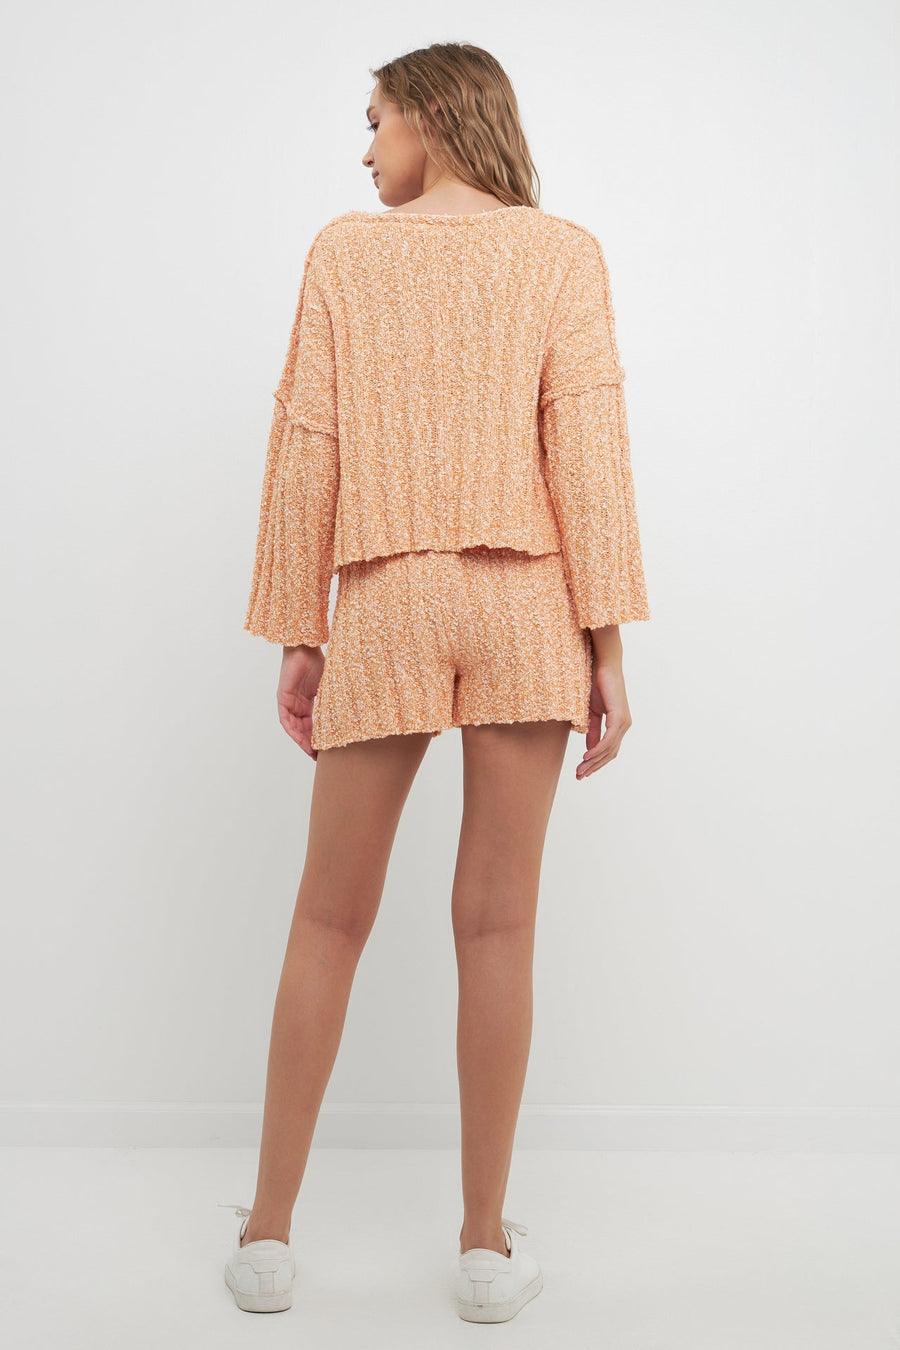 FREE THE ROSES-Cozy Sweater Shorts-SWEATERS & KNITS available at Objectrare